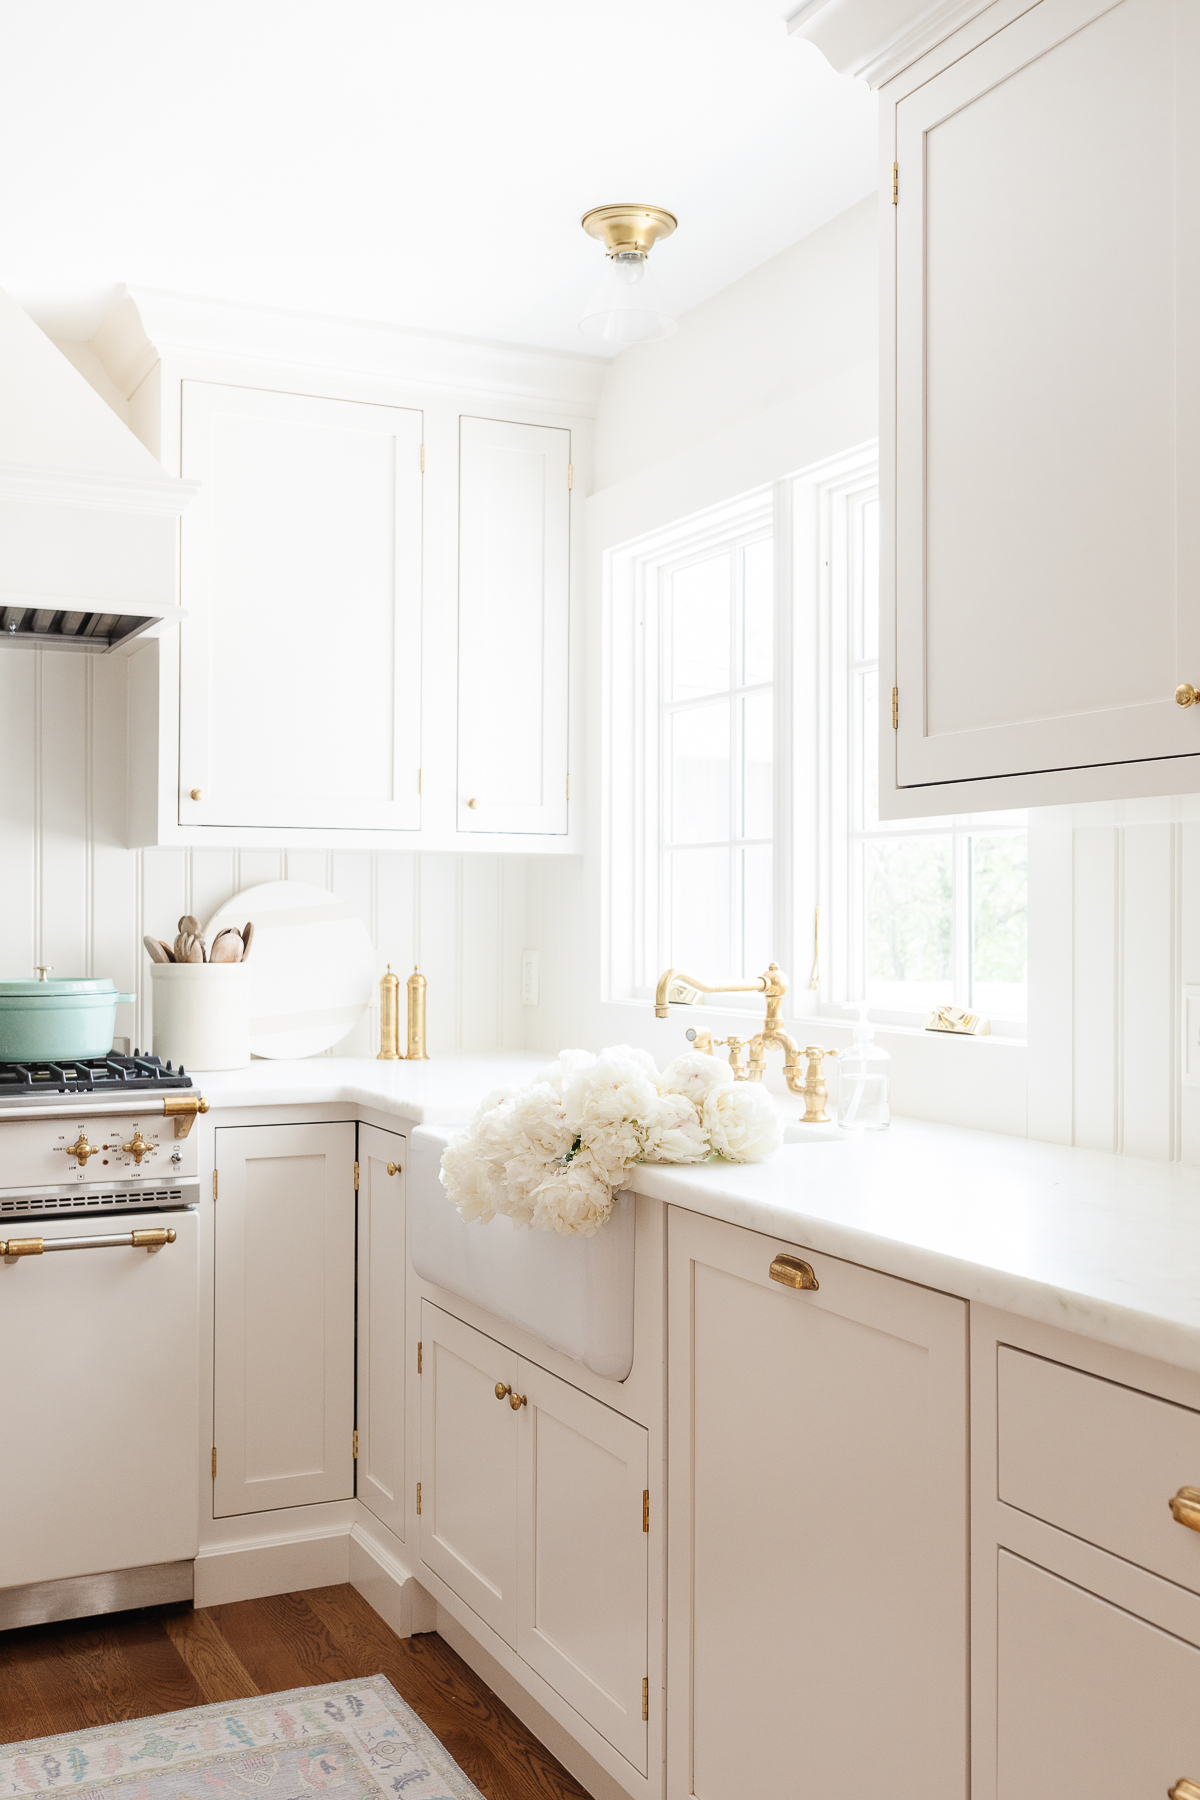 Cream kitchen cabinet with brass knobs in a traditional kitchen.